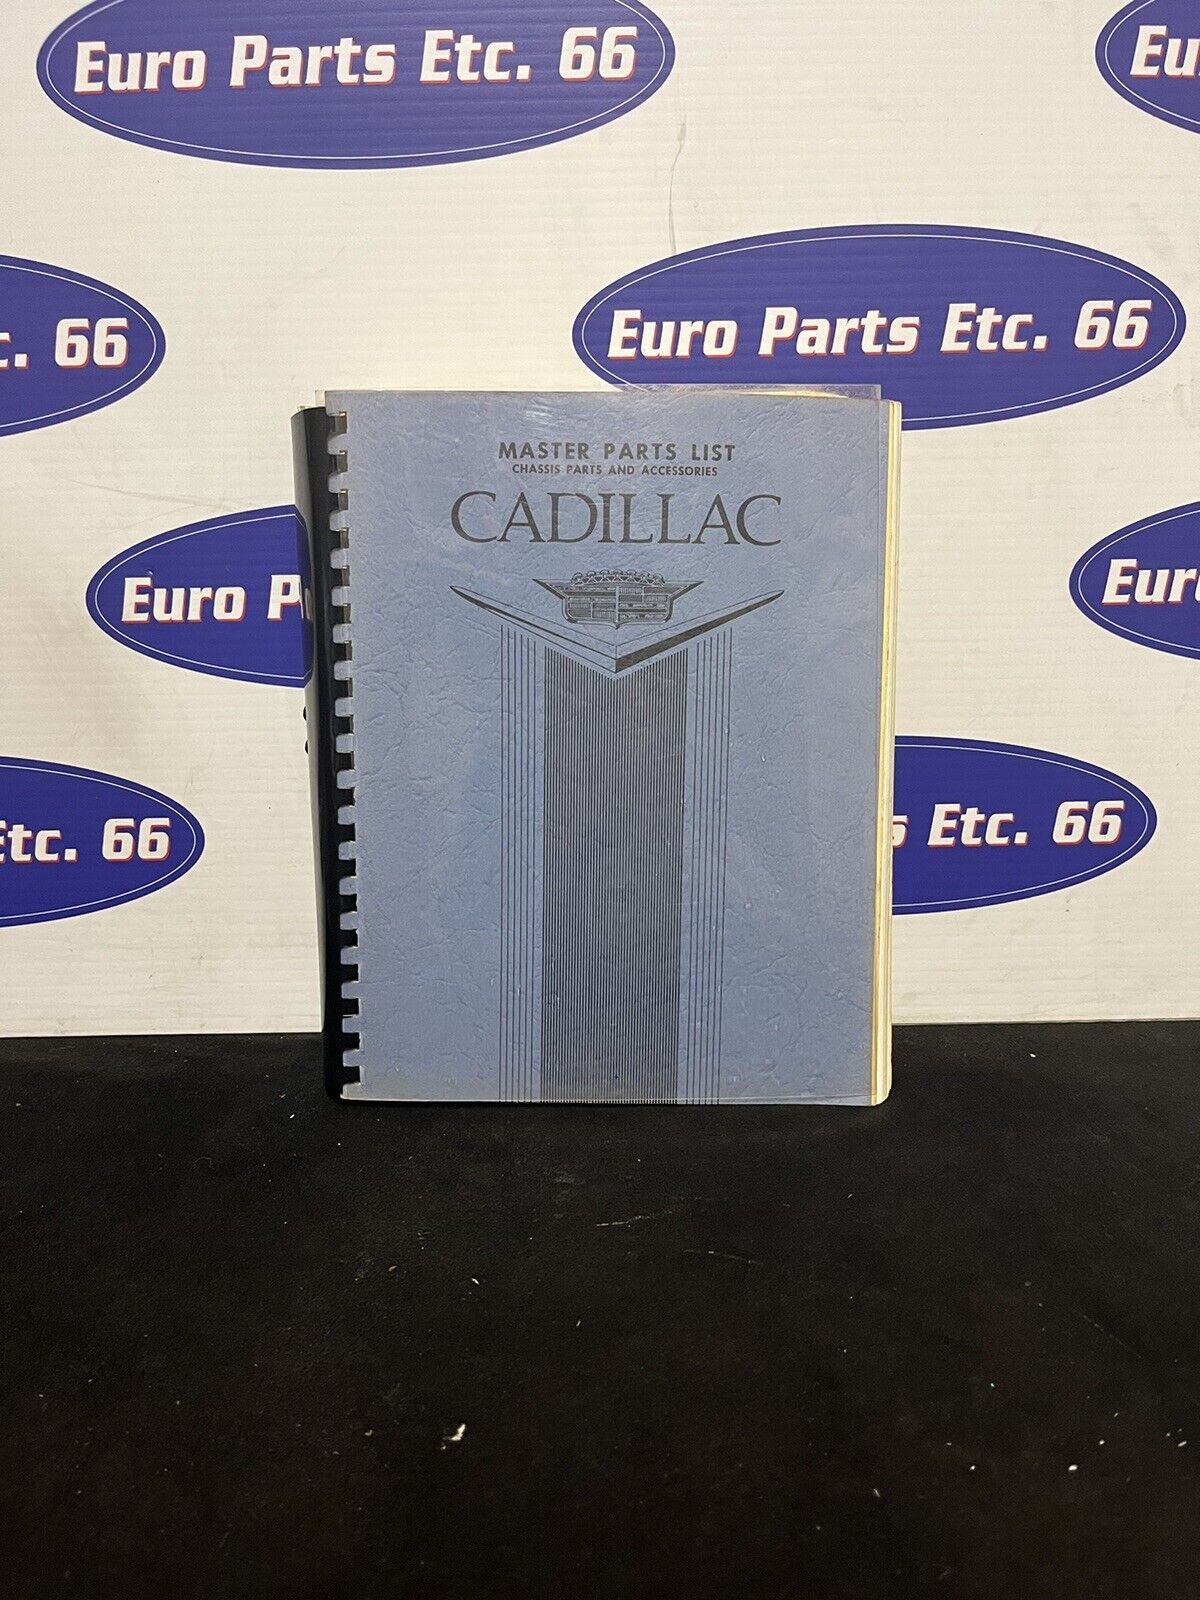 Cadillac Master Parts List Chassis Parts and Accessories - 17th Edition